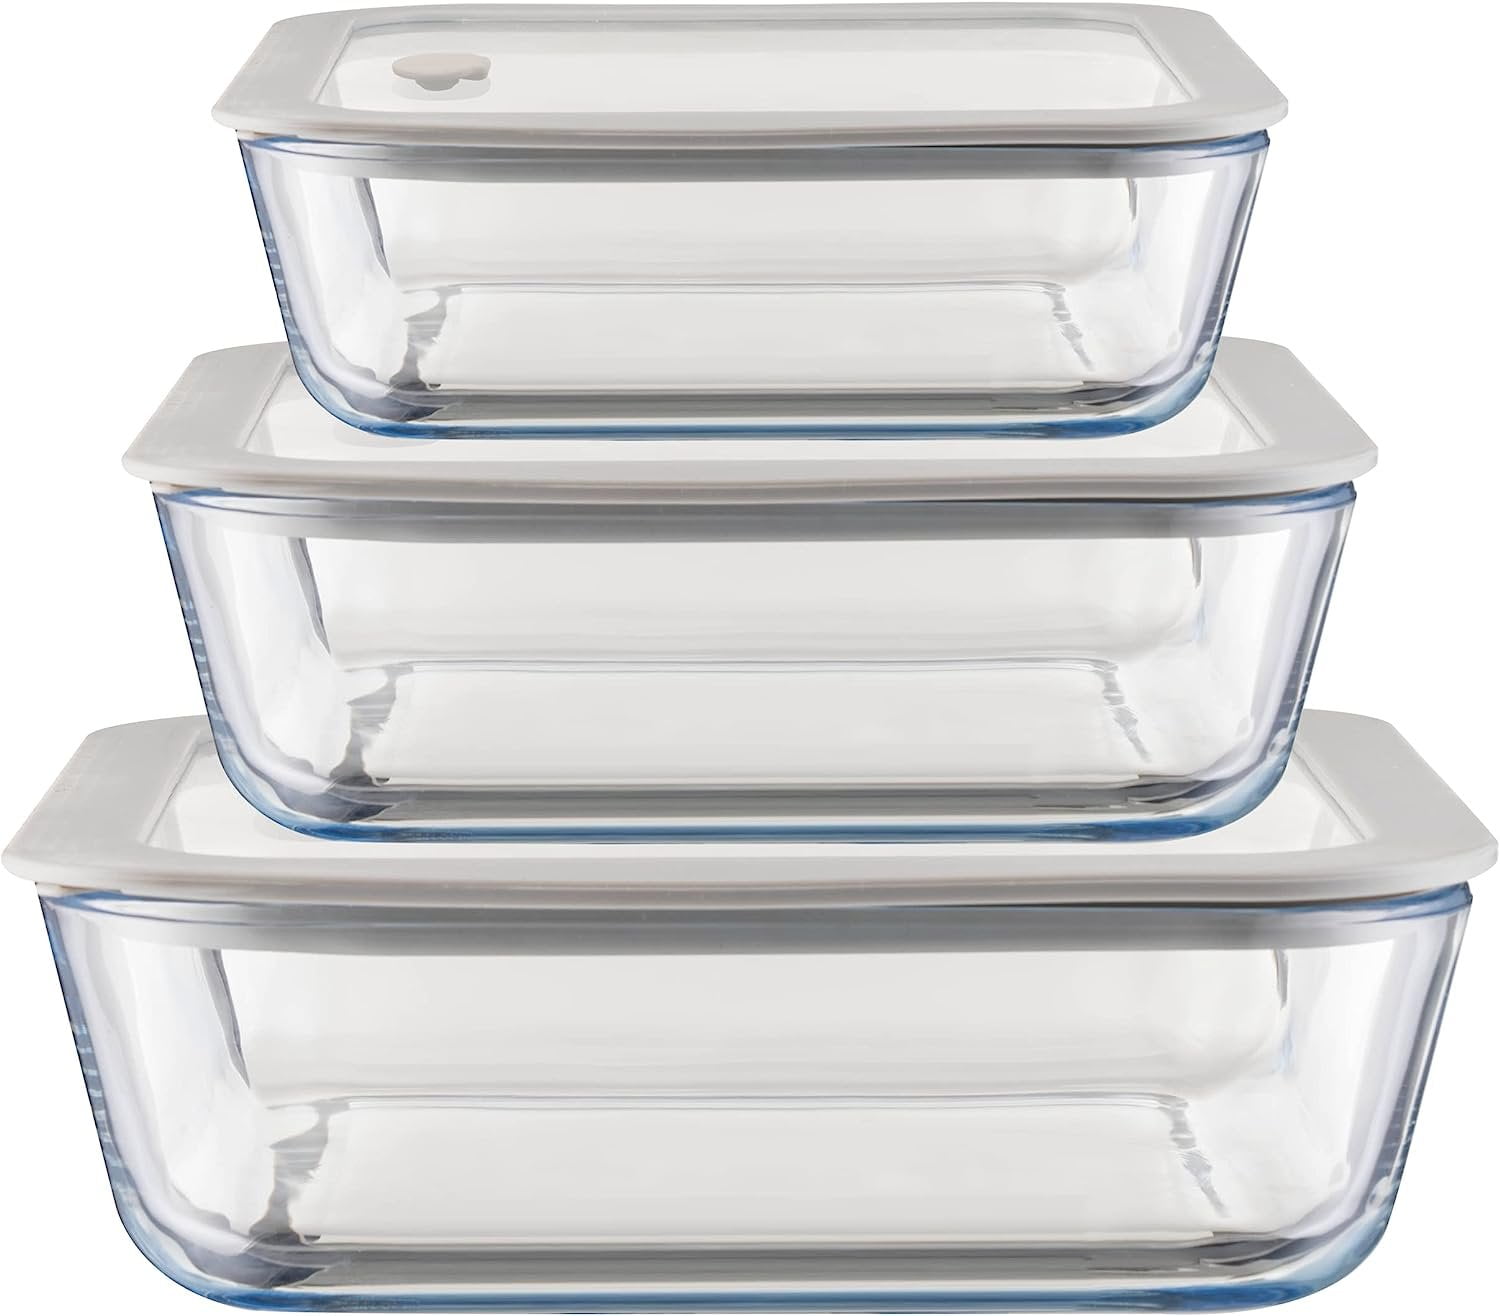 Circleware Snap Lid Square Glass Container Set, 2-Piece